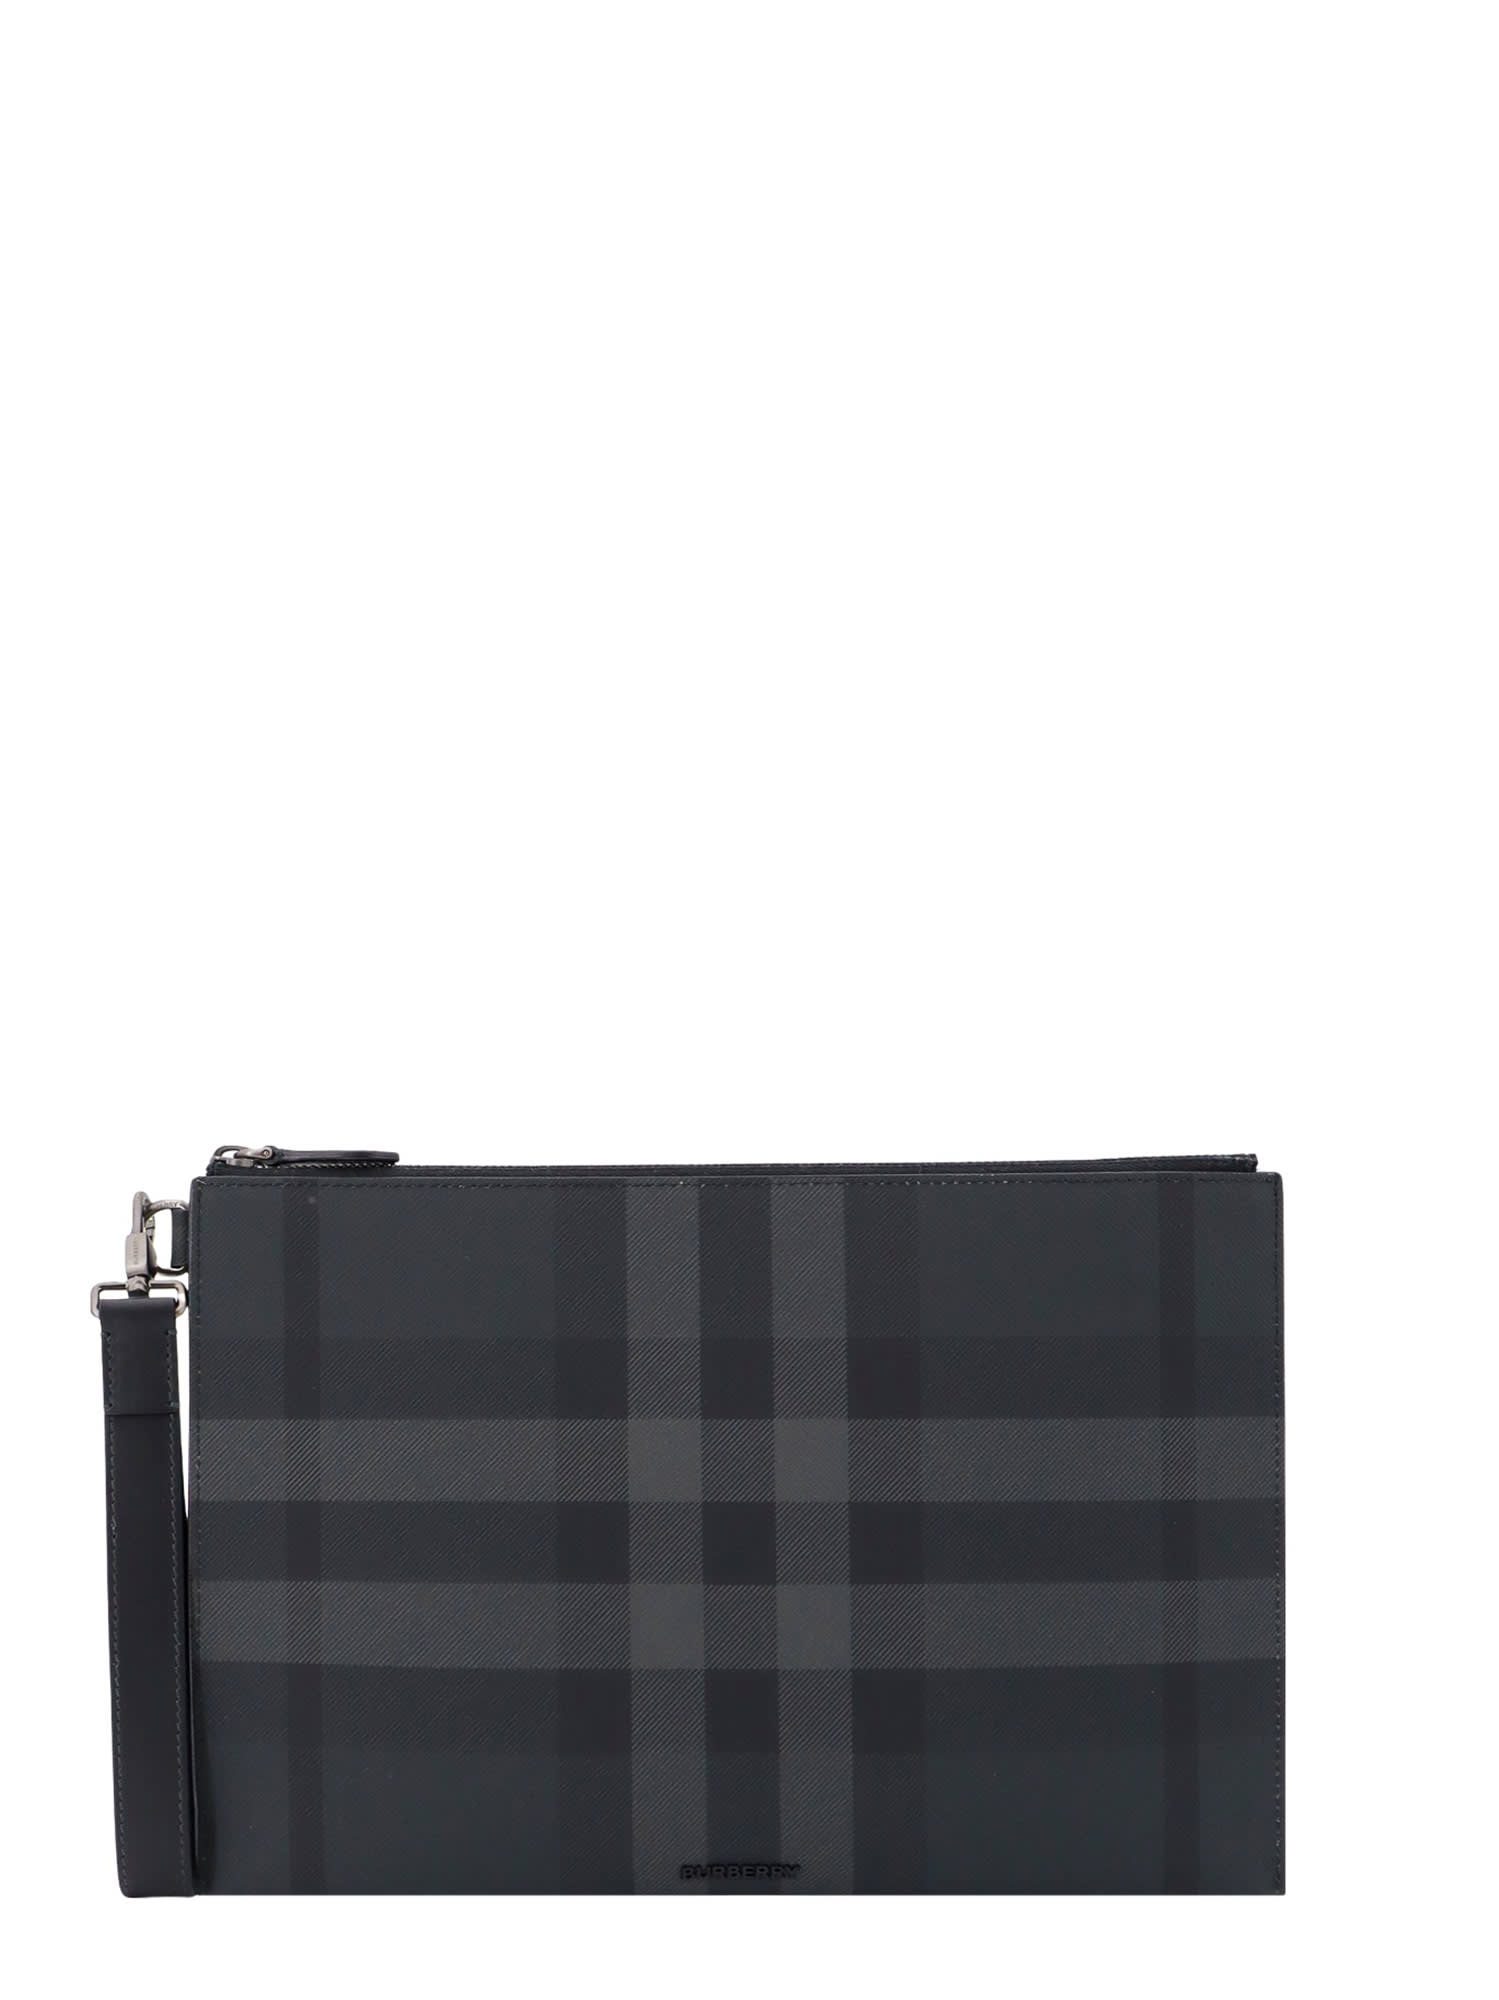 Burberry Check Large Pouch